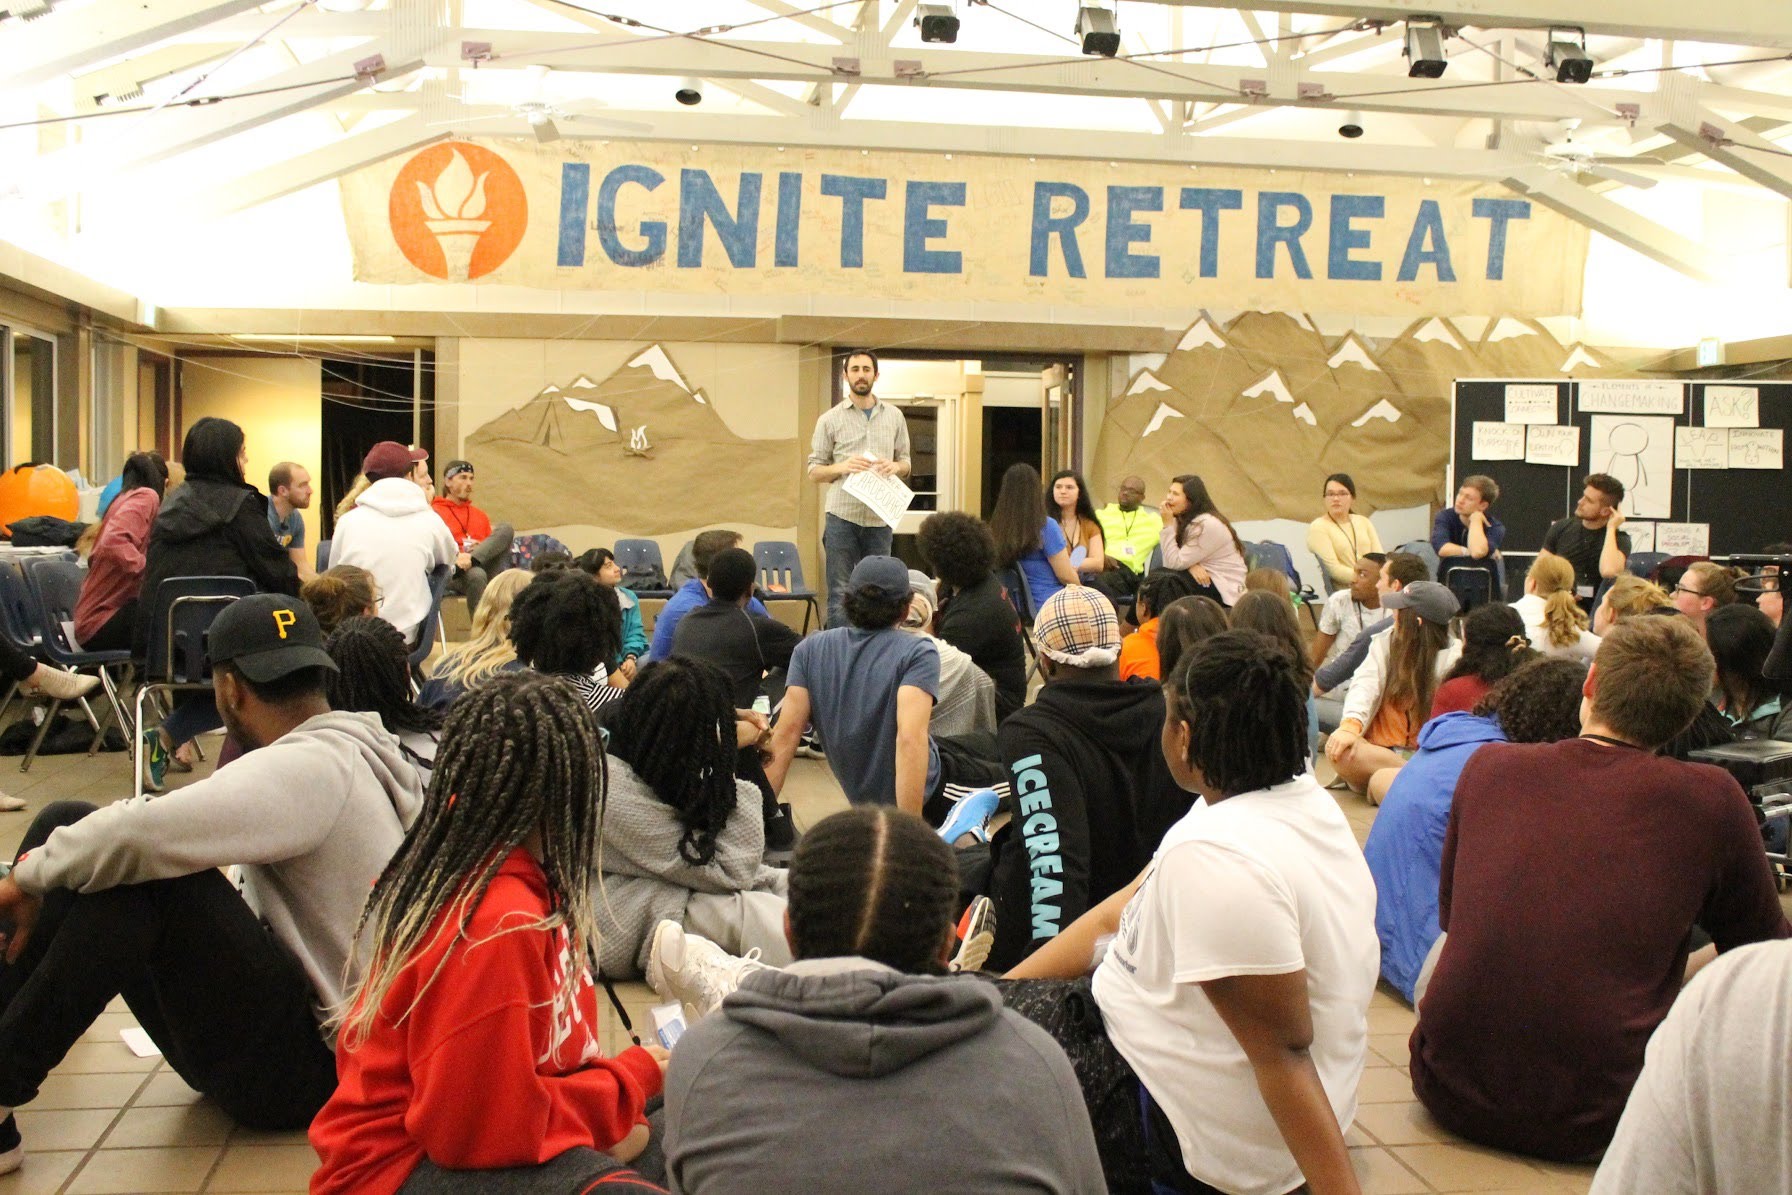 This photo shows Spud Marshall leading a session for the Sullivan Foundation's Ignite Retreat for changemakers